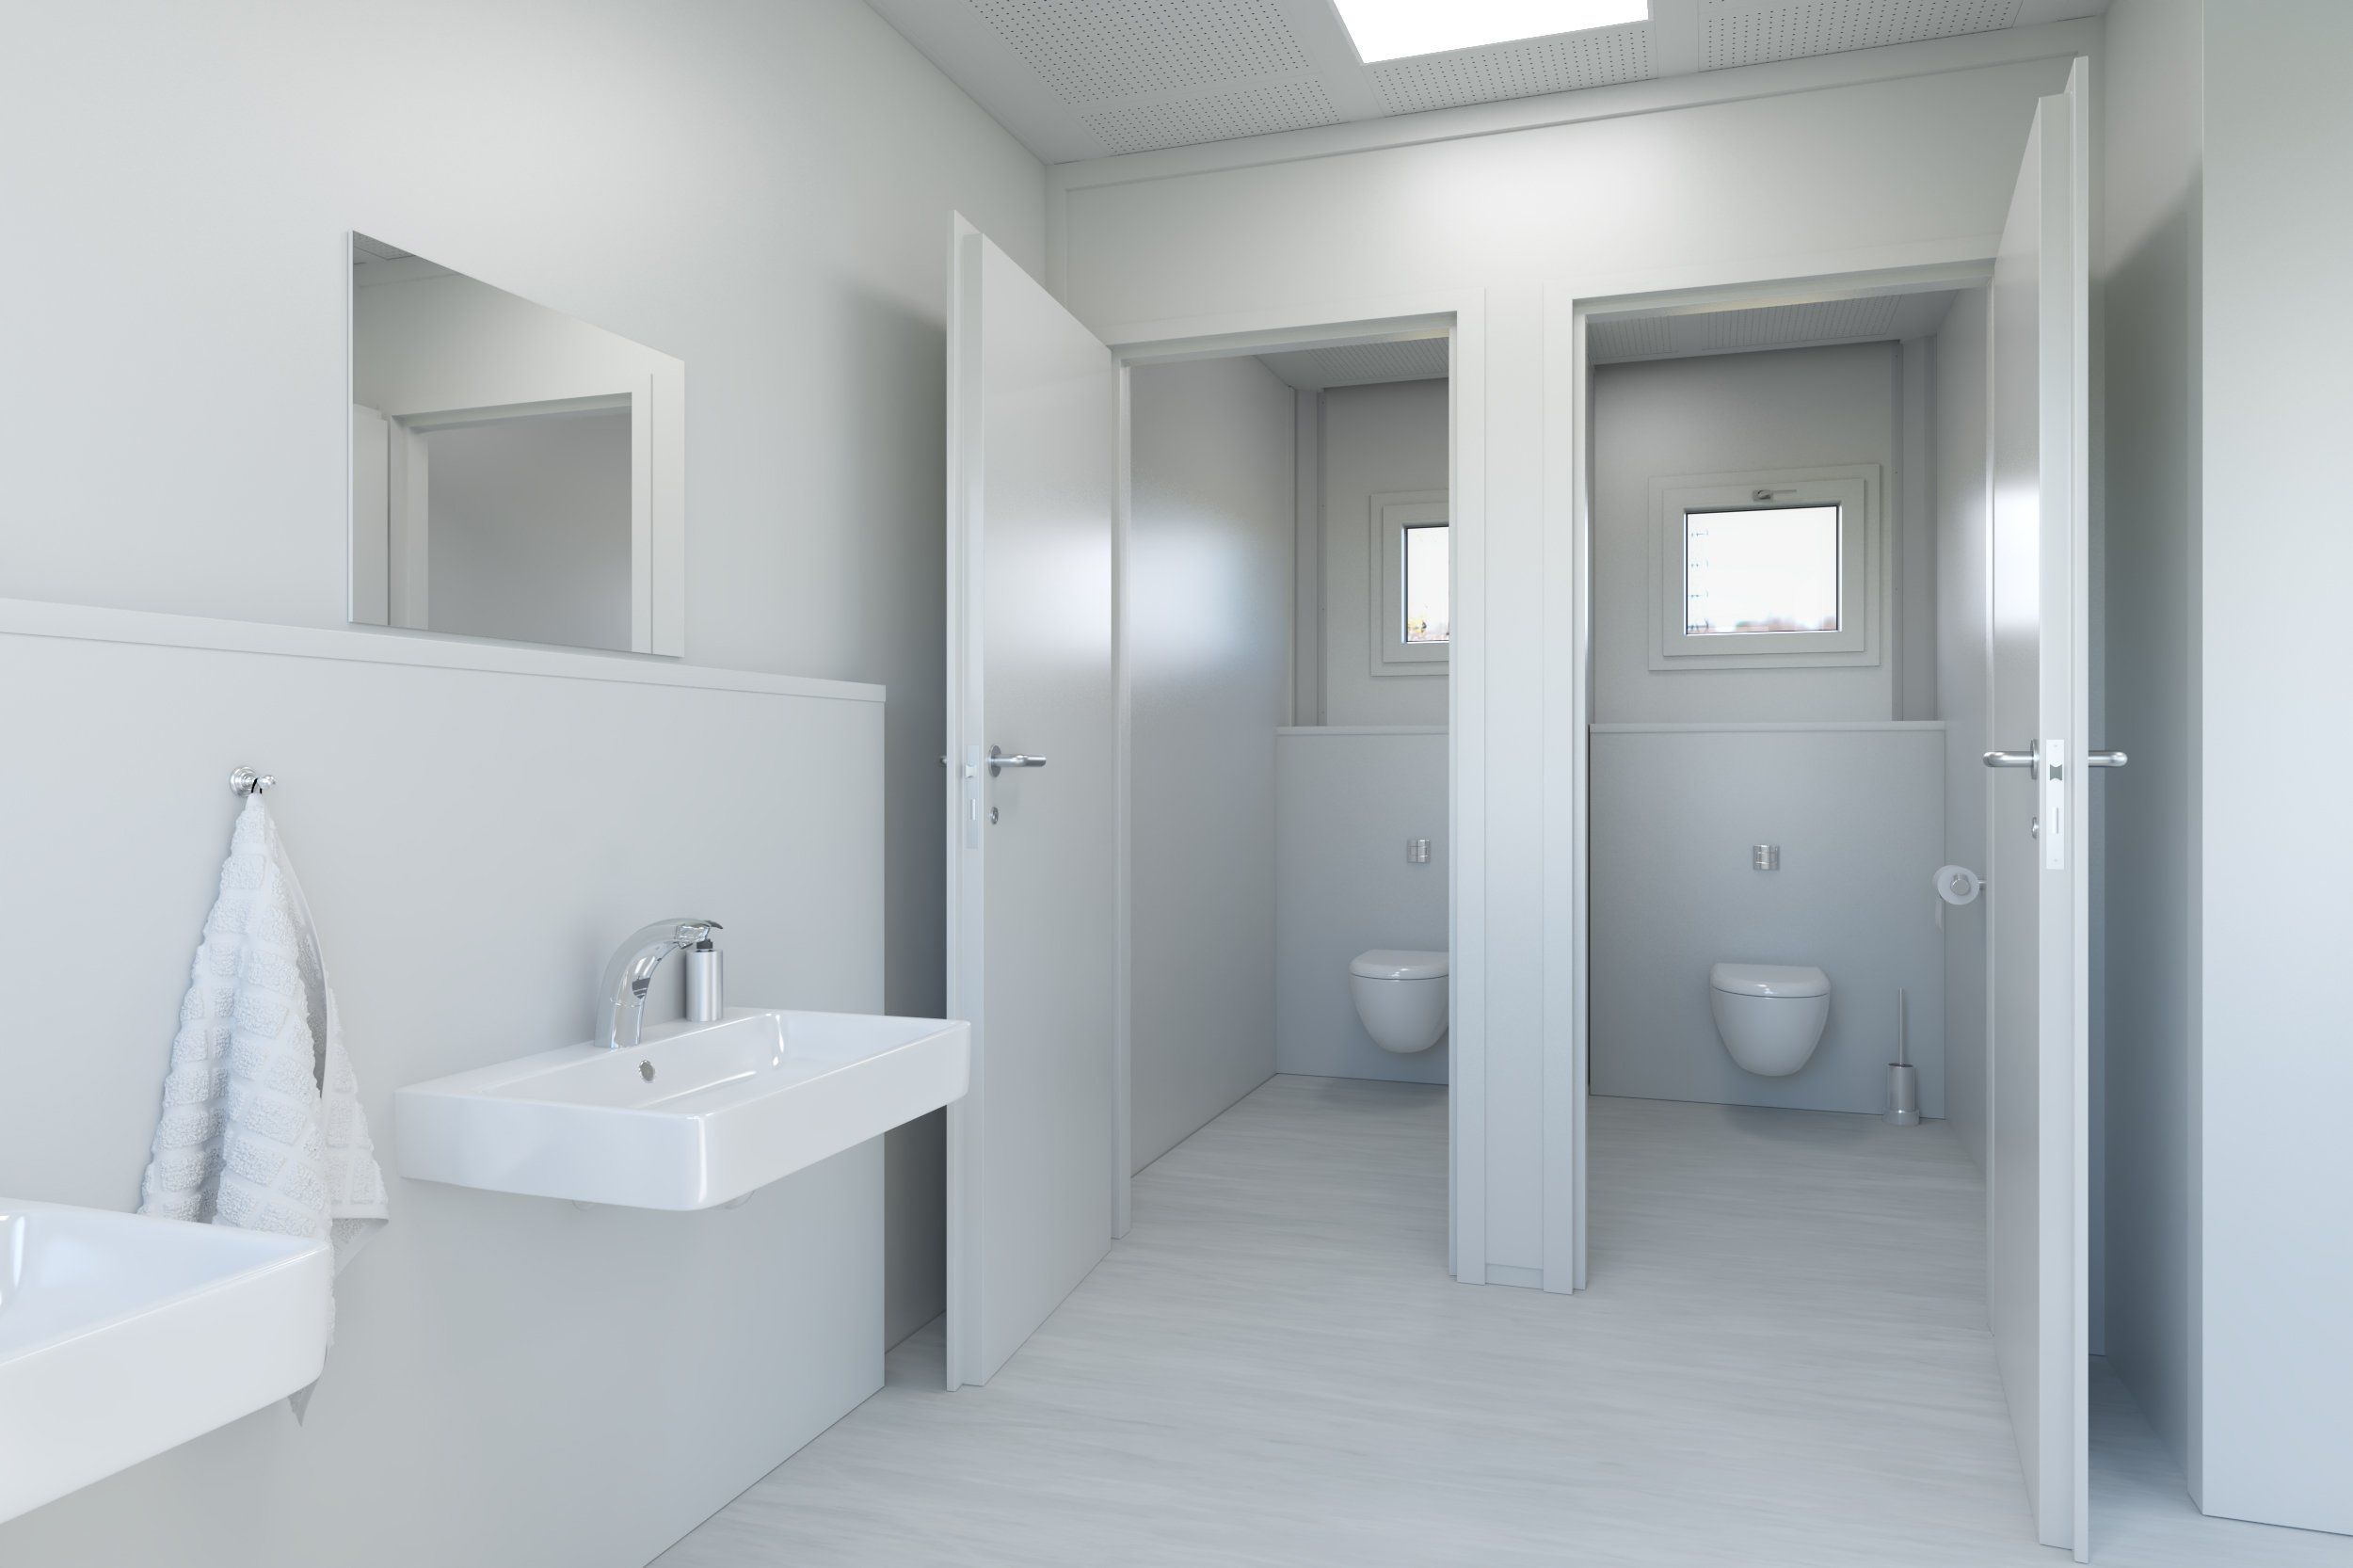 Sanitary facilities with shower cubicles